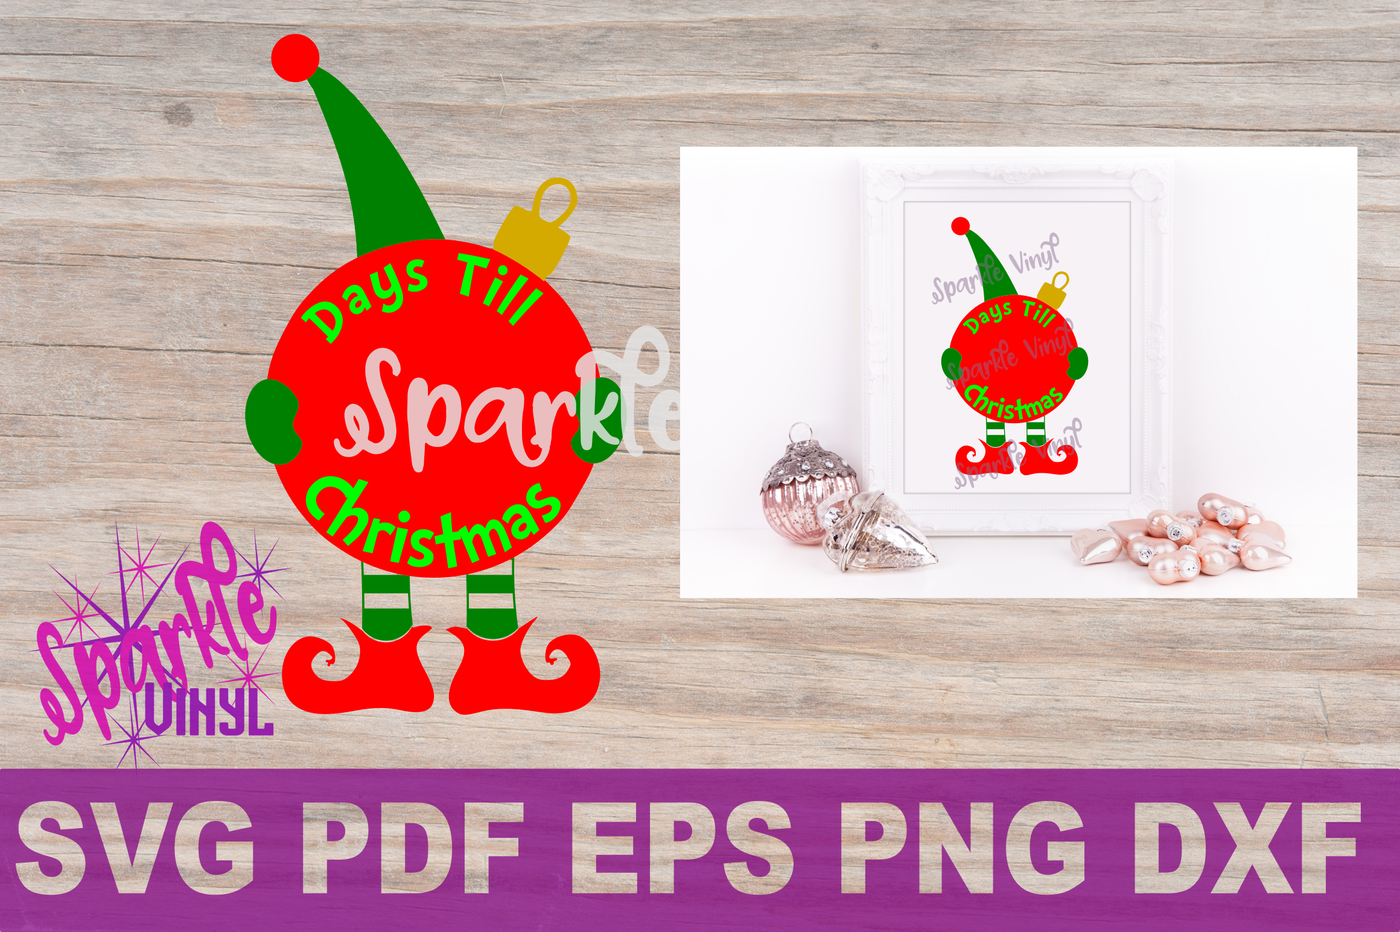 Svg Christmas Elf Countdown Sign Picture Printable Svg Cut File For Cricut Or Silhouette Dxf Eps Png Pdf Elf Clipart Diy Sign Stencil By Sparkle Vinyl Designs Thehungryjpeg Com